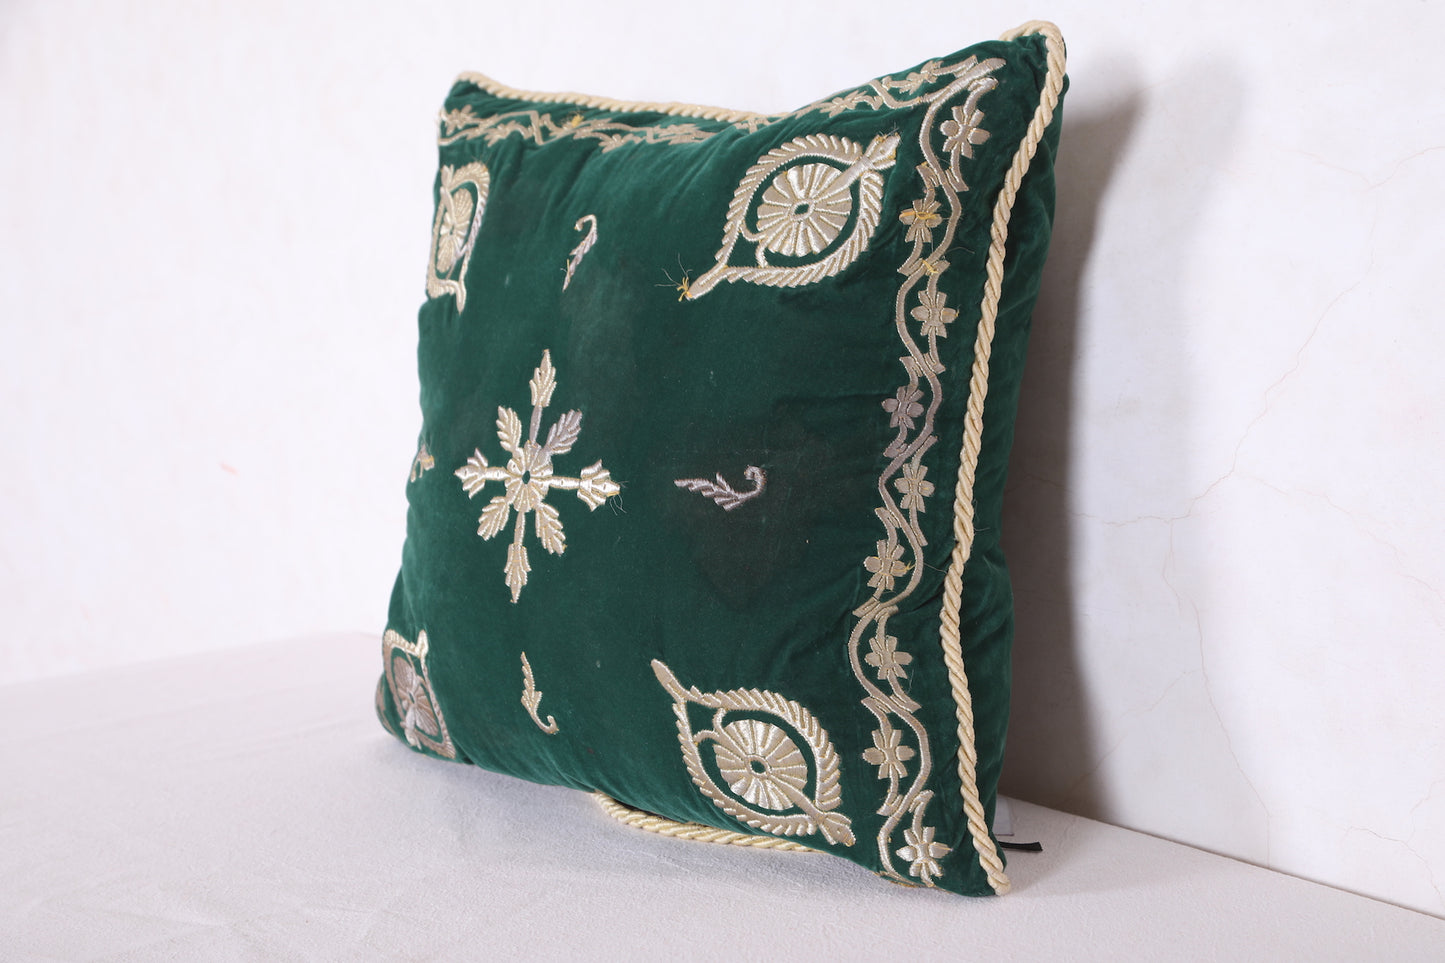 Green Moroccan kilim Pillow 18.8 INCHES X 18.8 INCHES